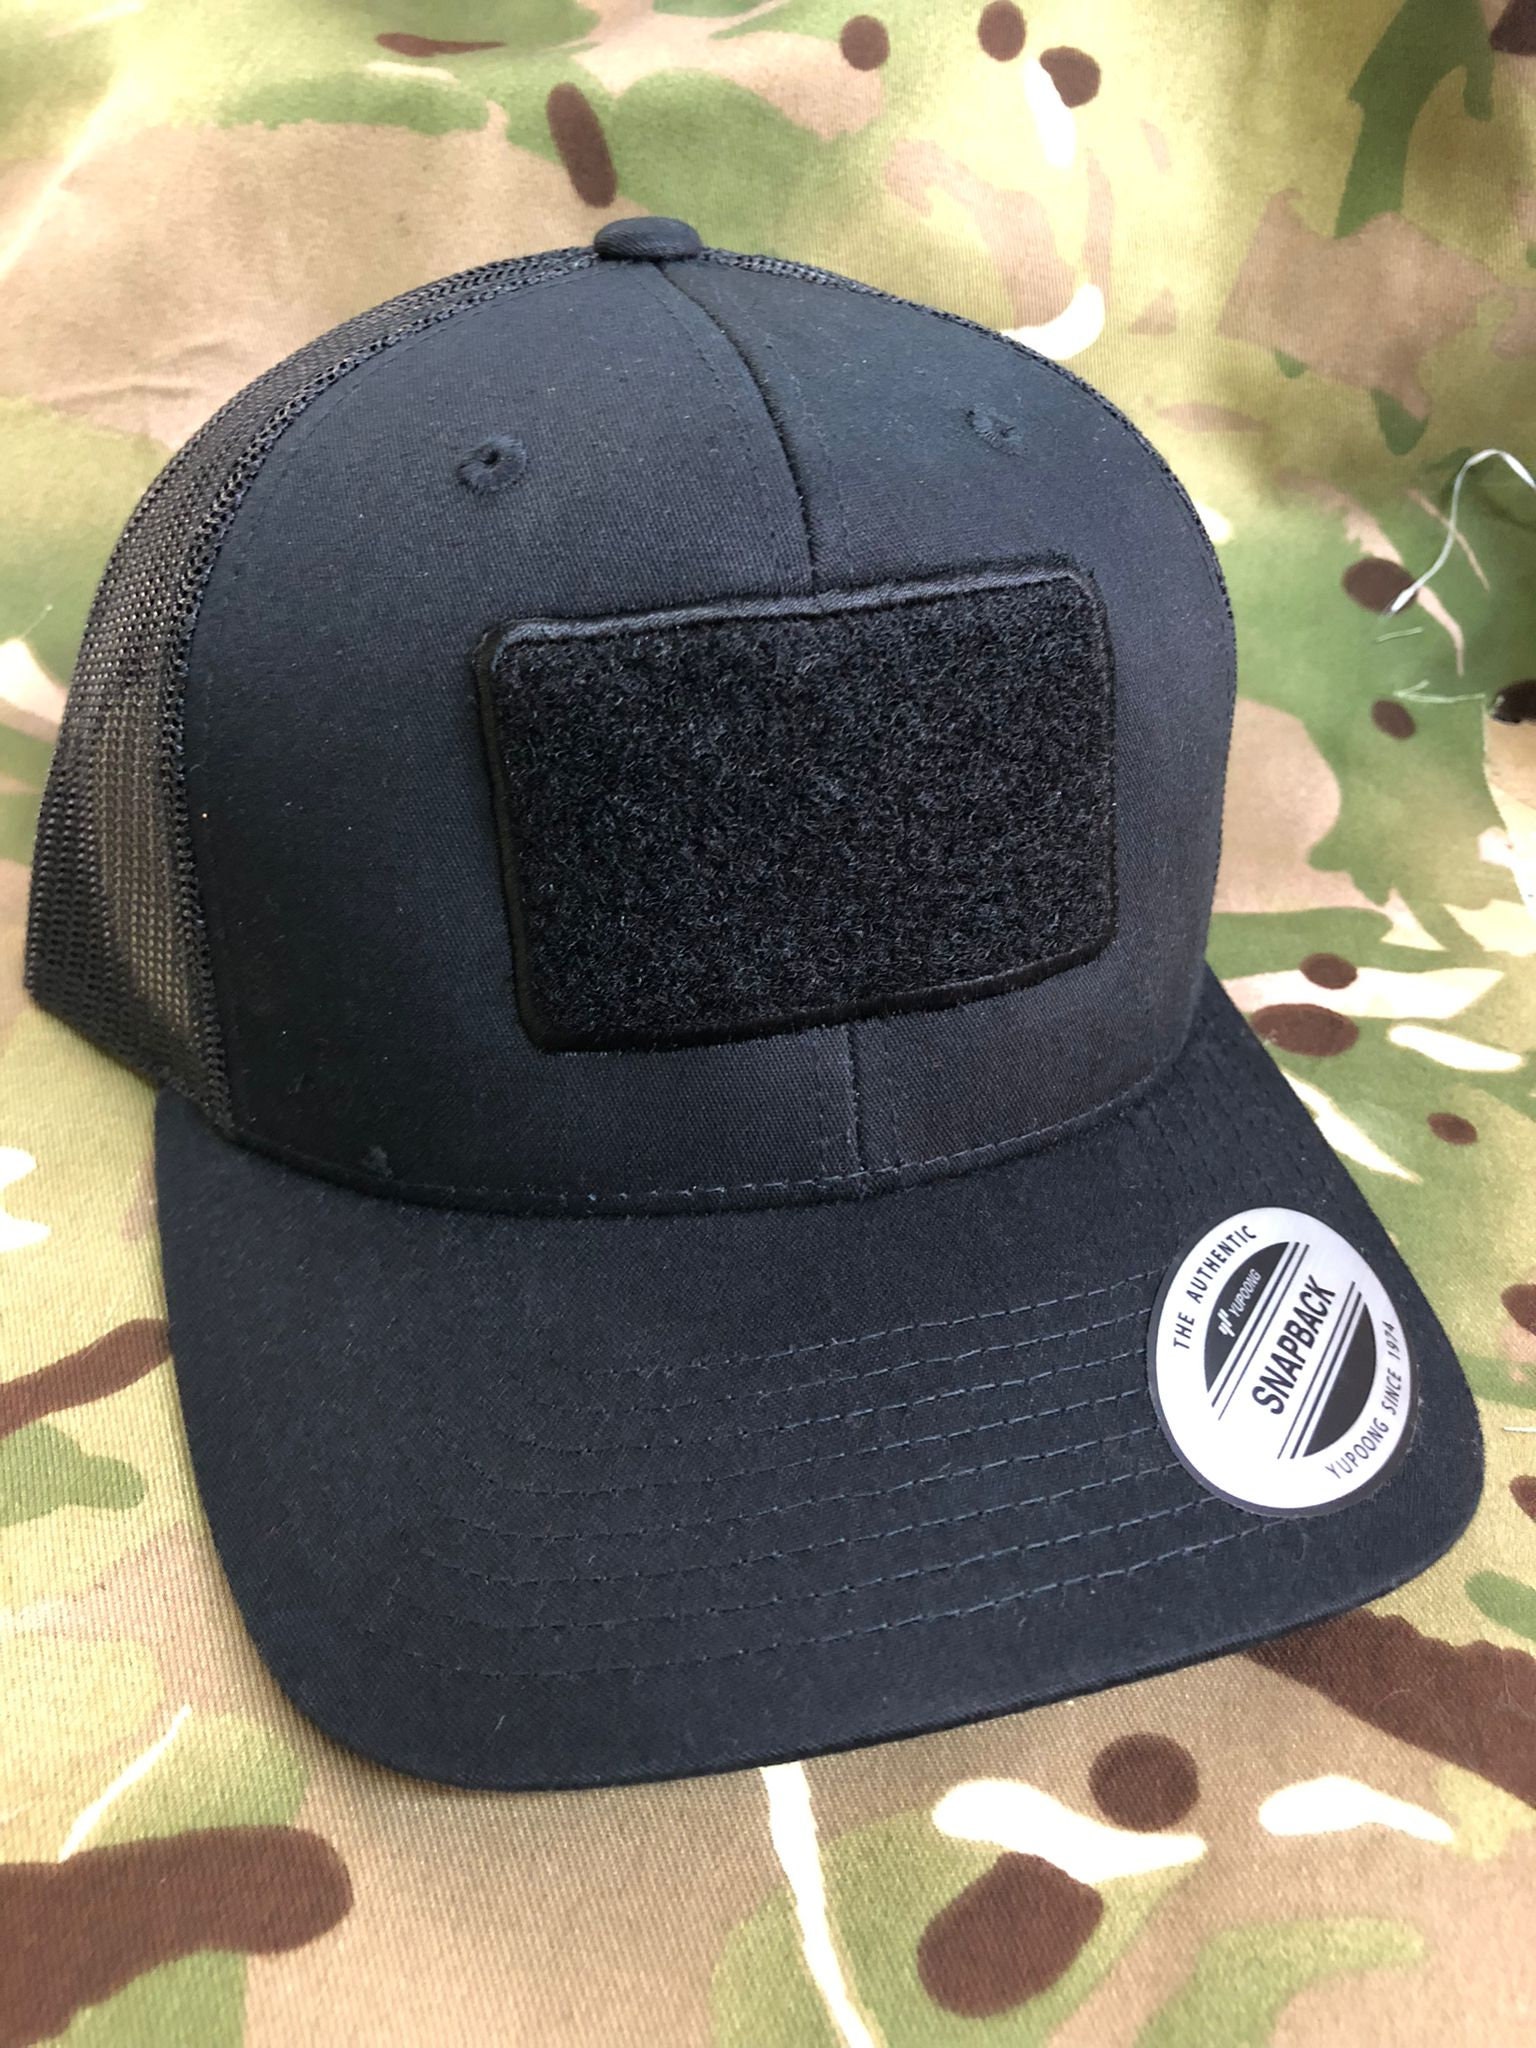 Shooters Cap Hat Trucker Velcro Back Patch Etsy CAP Tactical Tacticool Logo - Flexfit Yupoong Embroidered Stretch